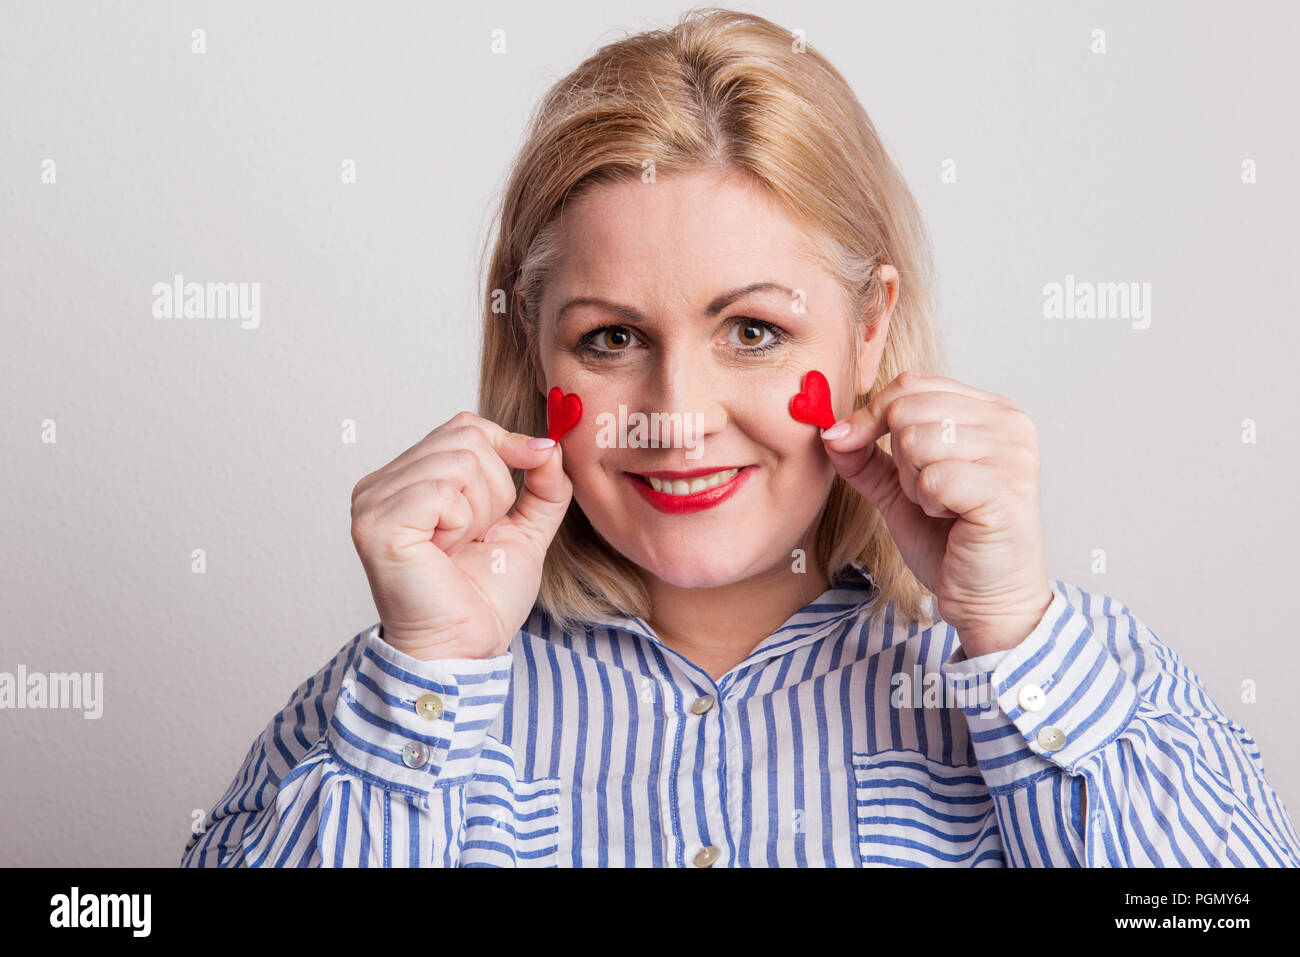 Portrait of an attractive overweight woman holding hearts on her cheeks. Stock Photo